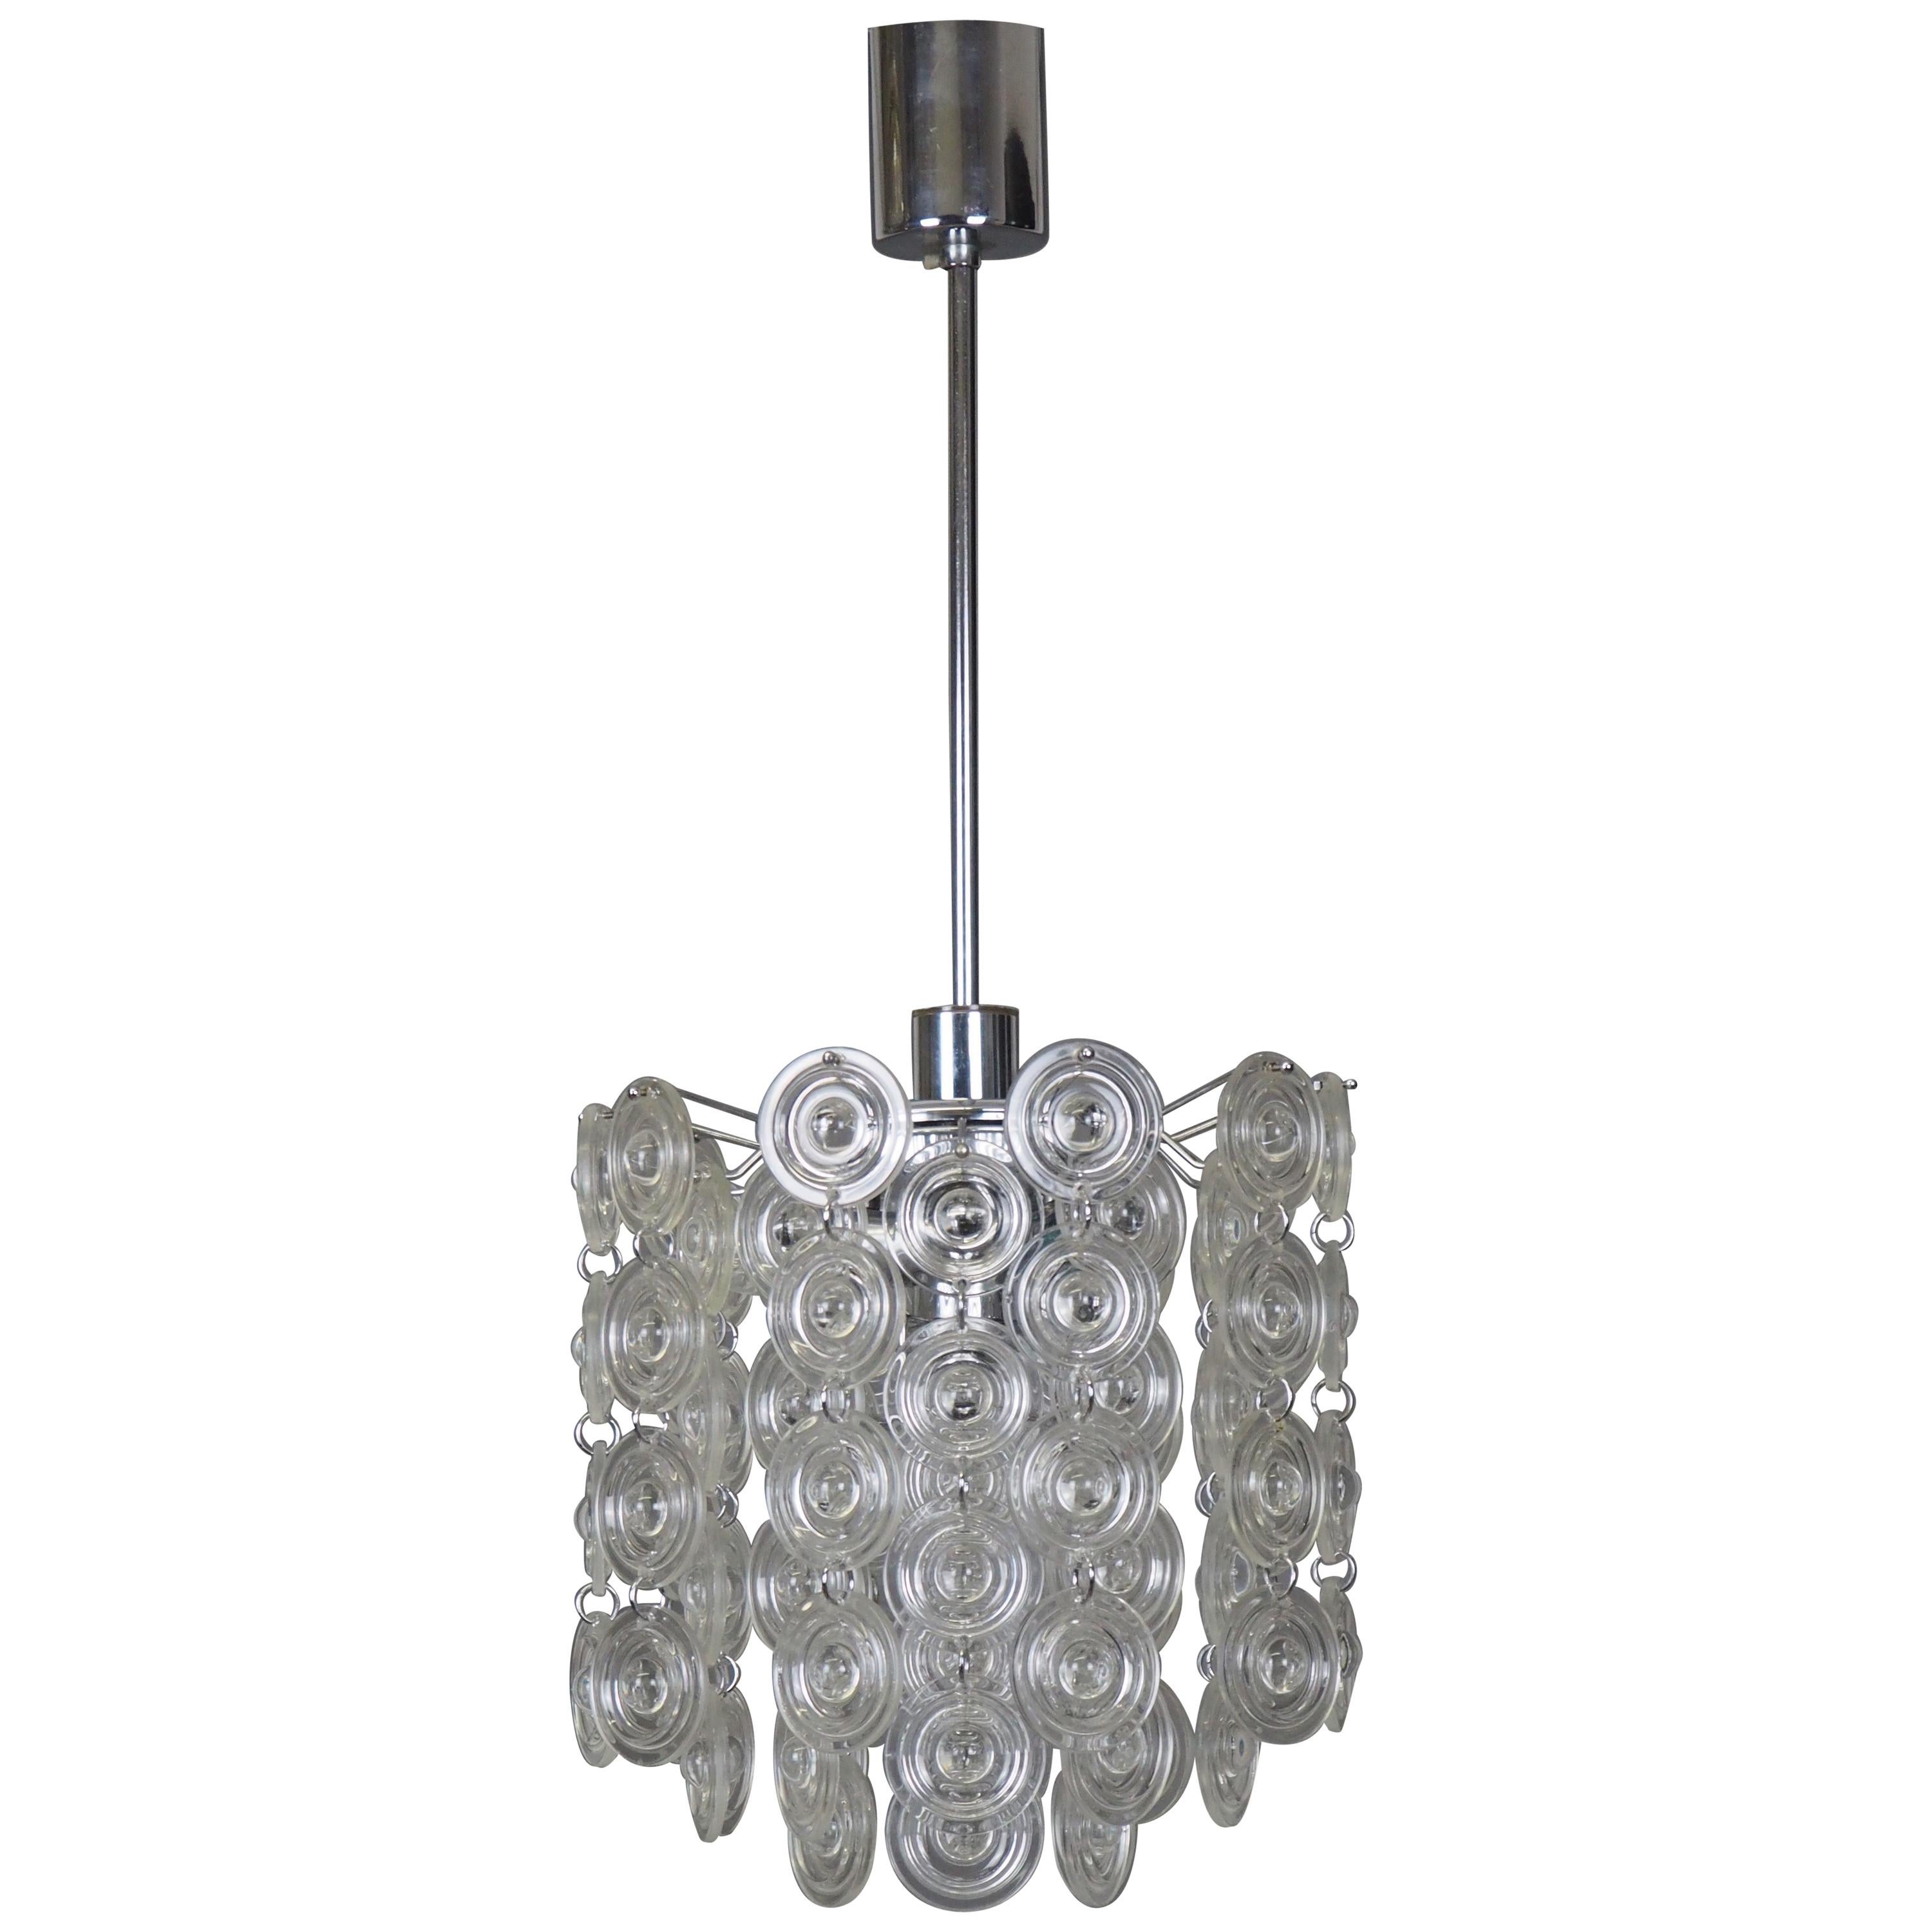 Rare mid - century glass and nickel chandelier by Sciolari, Italy, circa 1970s.
This high quality piece is made of many clear Murano glass disk hanging on the nickeled brass frame.

The totally height of chandelier is 27.1 inch (height of the